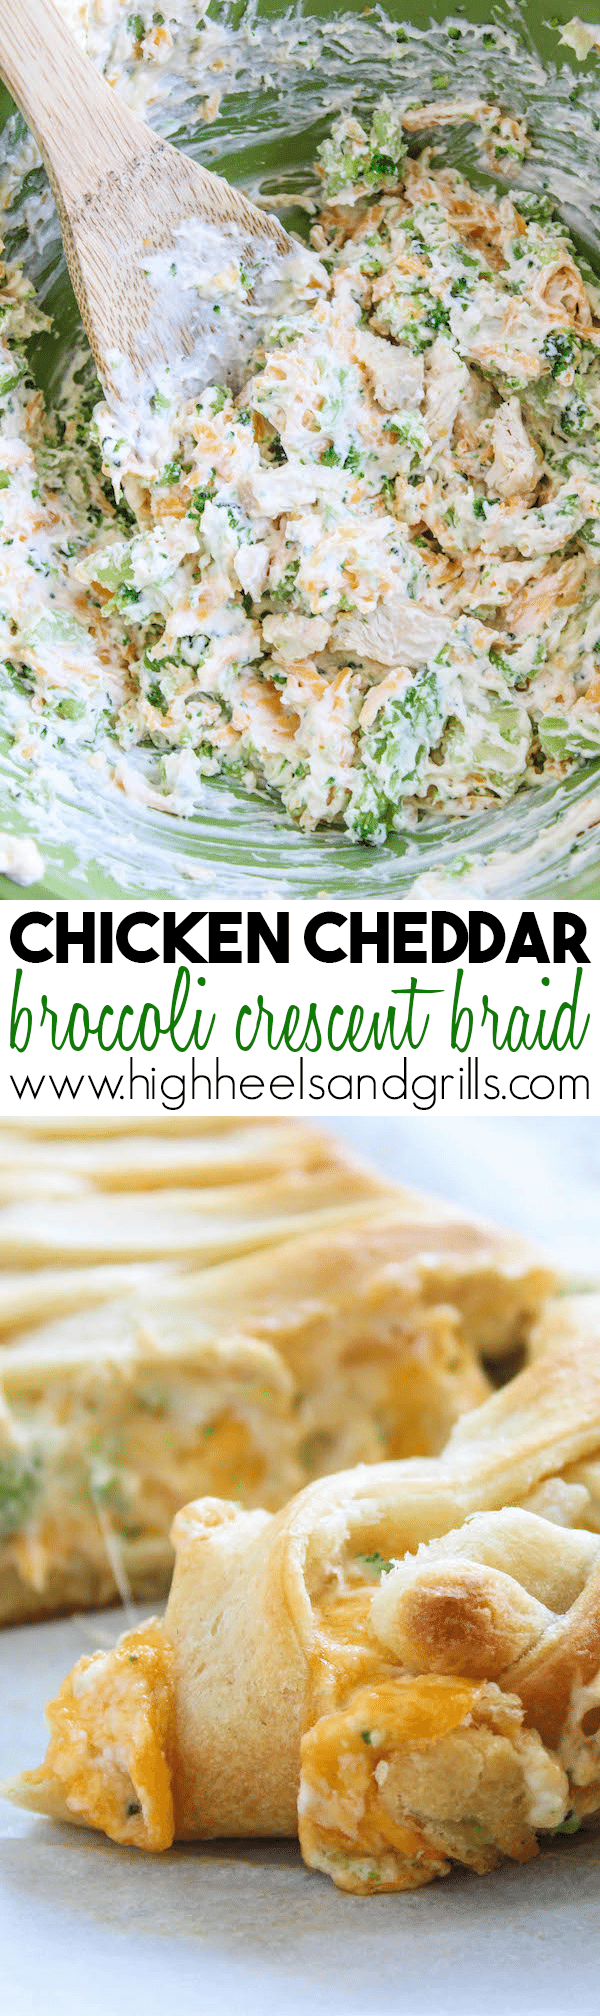 Chicken Cheddar Broccoli Crescent Braid - Cream cheese, chicken, cheddar, and broccoli stuffed into a beautiful crescent braid. {Which looks more intimidating than it really is} This is a dinner favorite for sure!